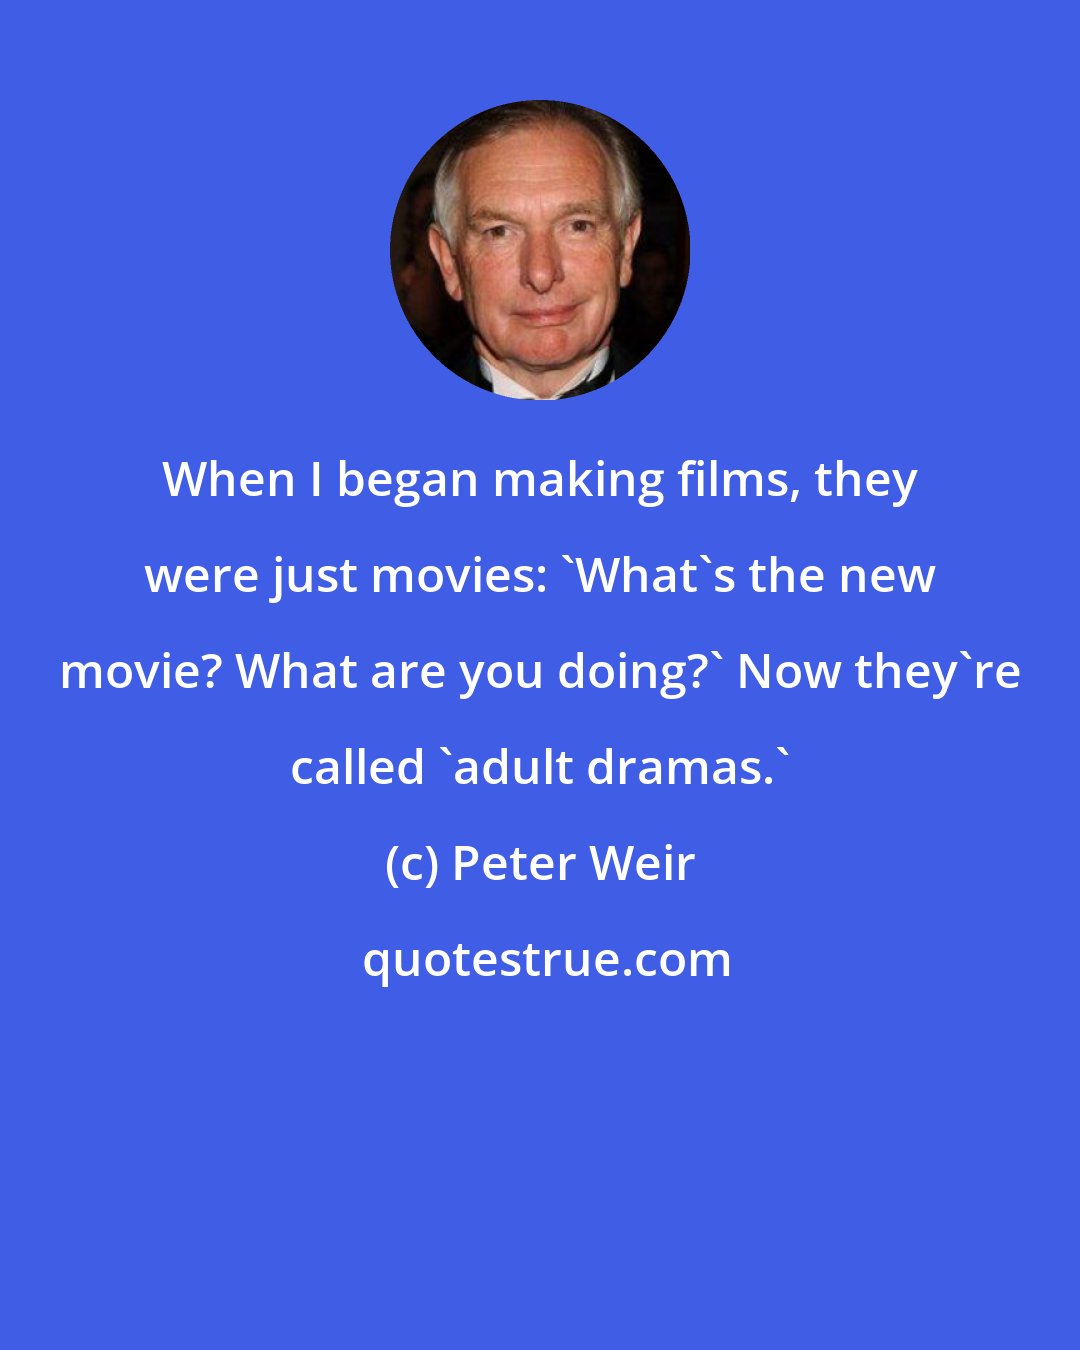 Peter Weir: When I began making films, they were just movies: 'What's the new movie? What are you doing?' Now they're called 'adult dramas.'